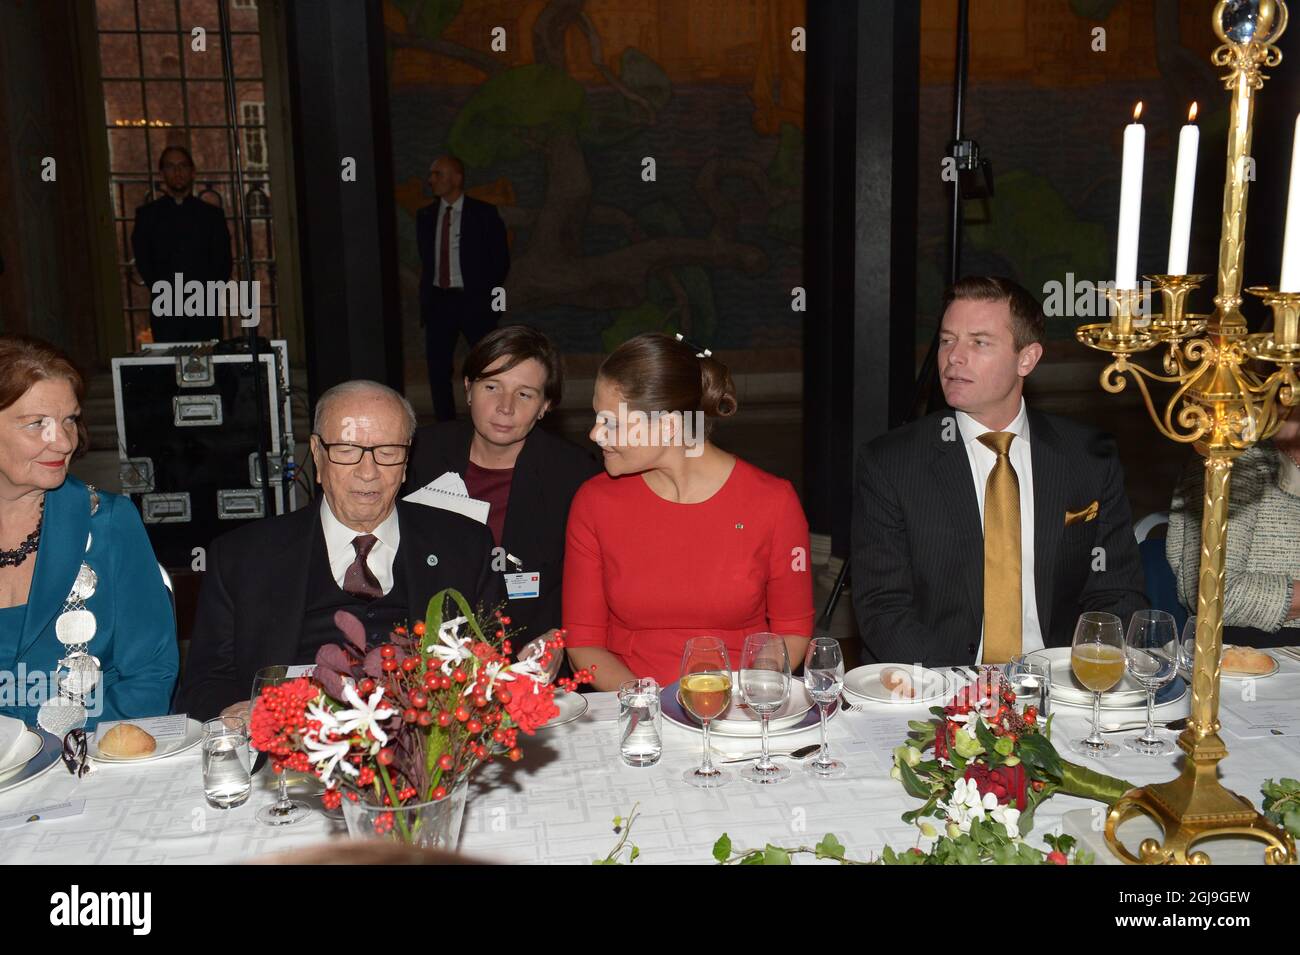 STOCKHOLM 2015-11-05 Crown Princess Victoria talks to the President of Tunisia, Beji CaÃ¯d Essebs, during a lunch at the City Hall in Stockholm, Sweden, November 5, 2015. The Tunisian President is on a State Visit to Sweden. Foto: Maja Suslin / TT kod 10300  Stock Photo